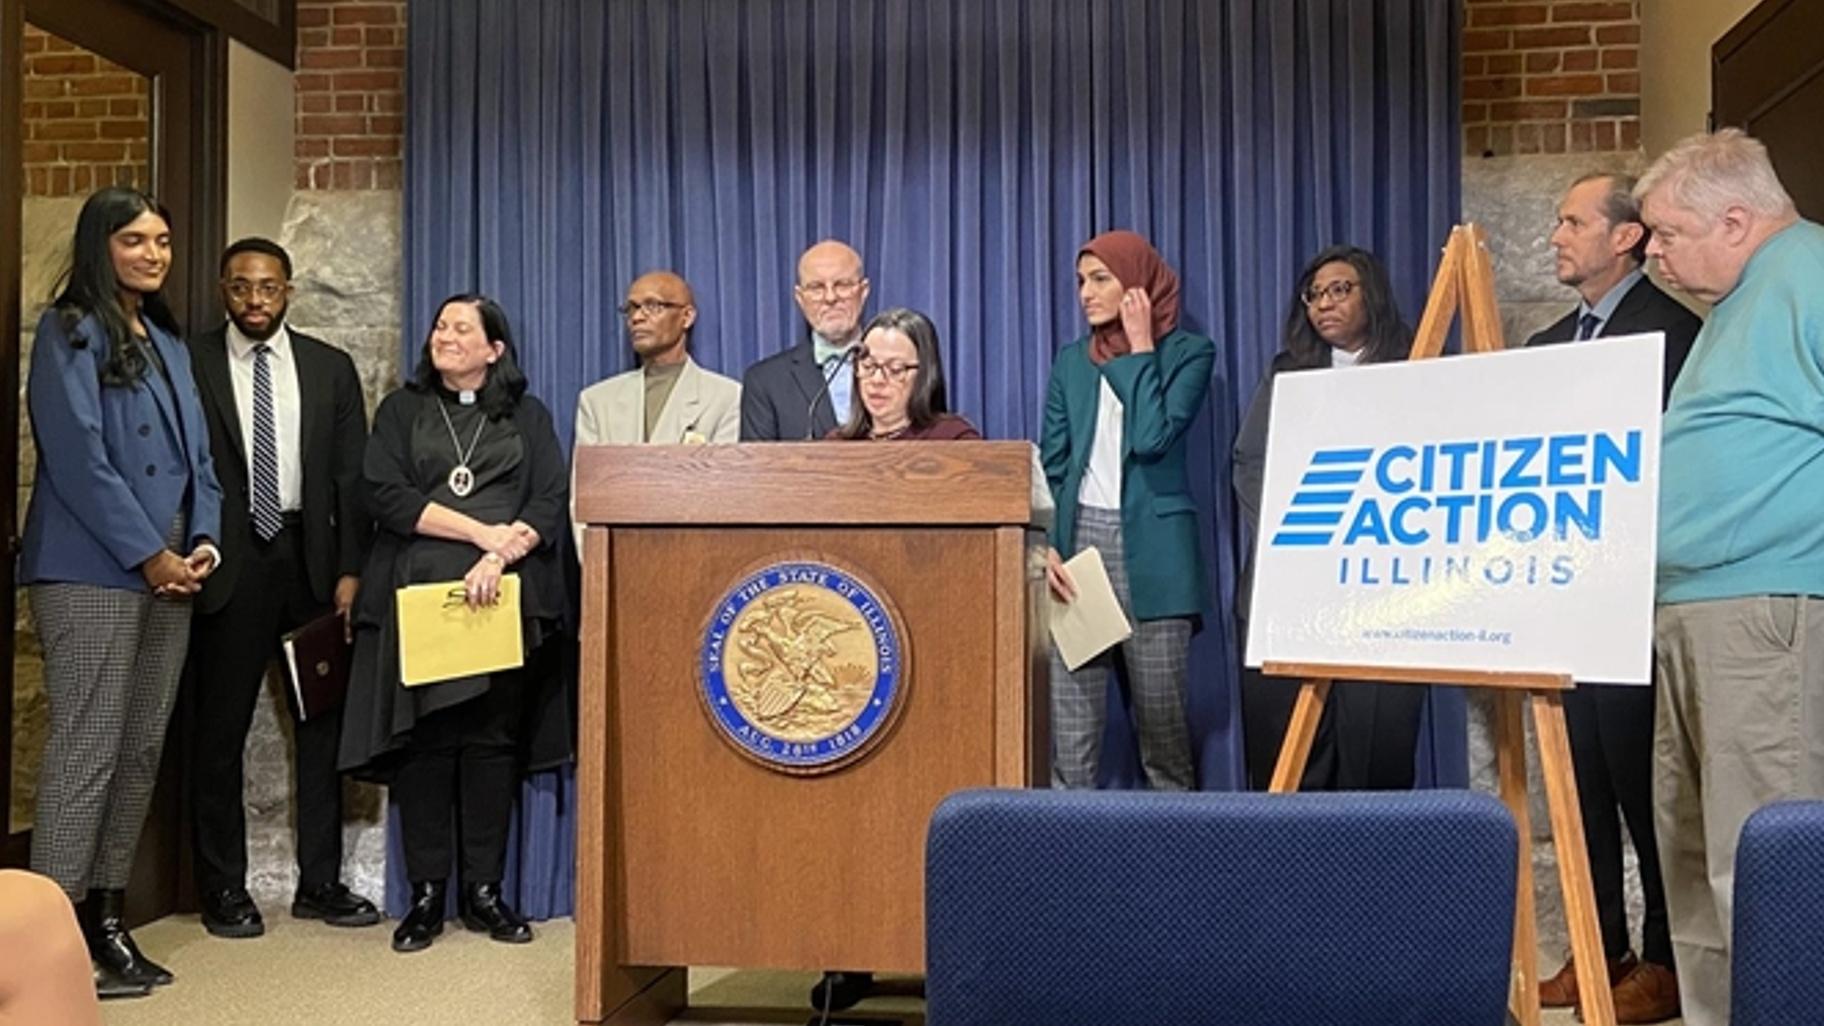 Julie Sampson, co-director of Citizen Action Illinois, speaks at a news conference introducing a bill intended to make certain medications less expensive in Illinois. (Alex Abbeduto / Capitol News Illinois)